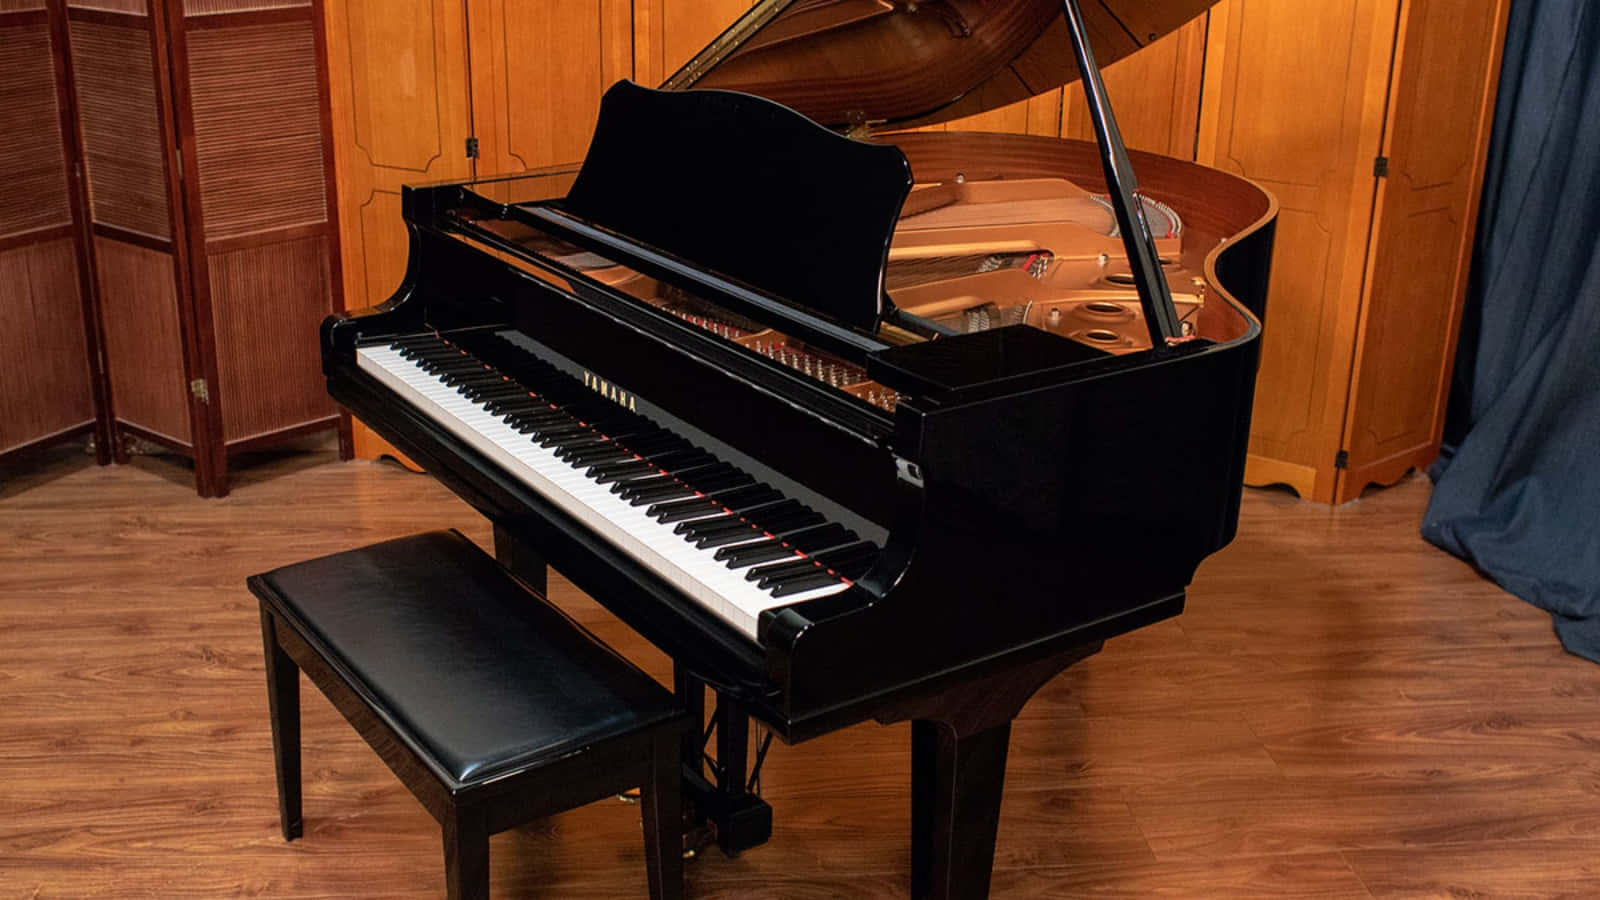 "The perfect way to enjoy a calming evening - playing some beautiful music on a grand piano"